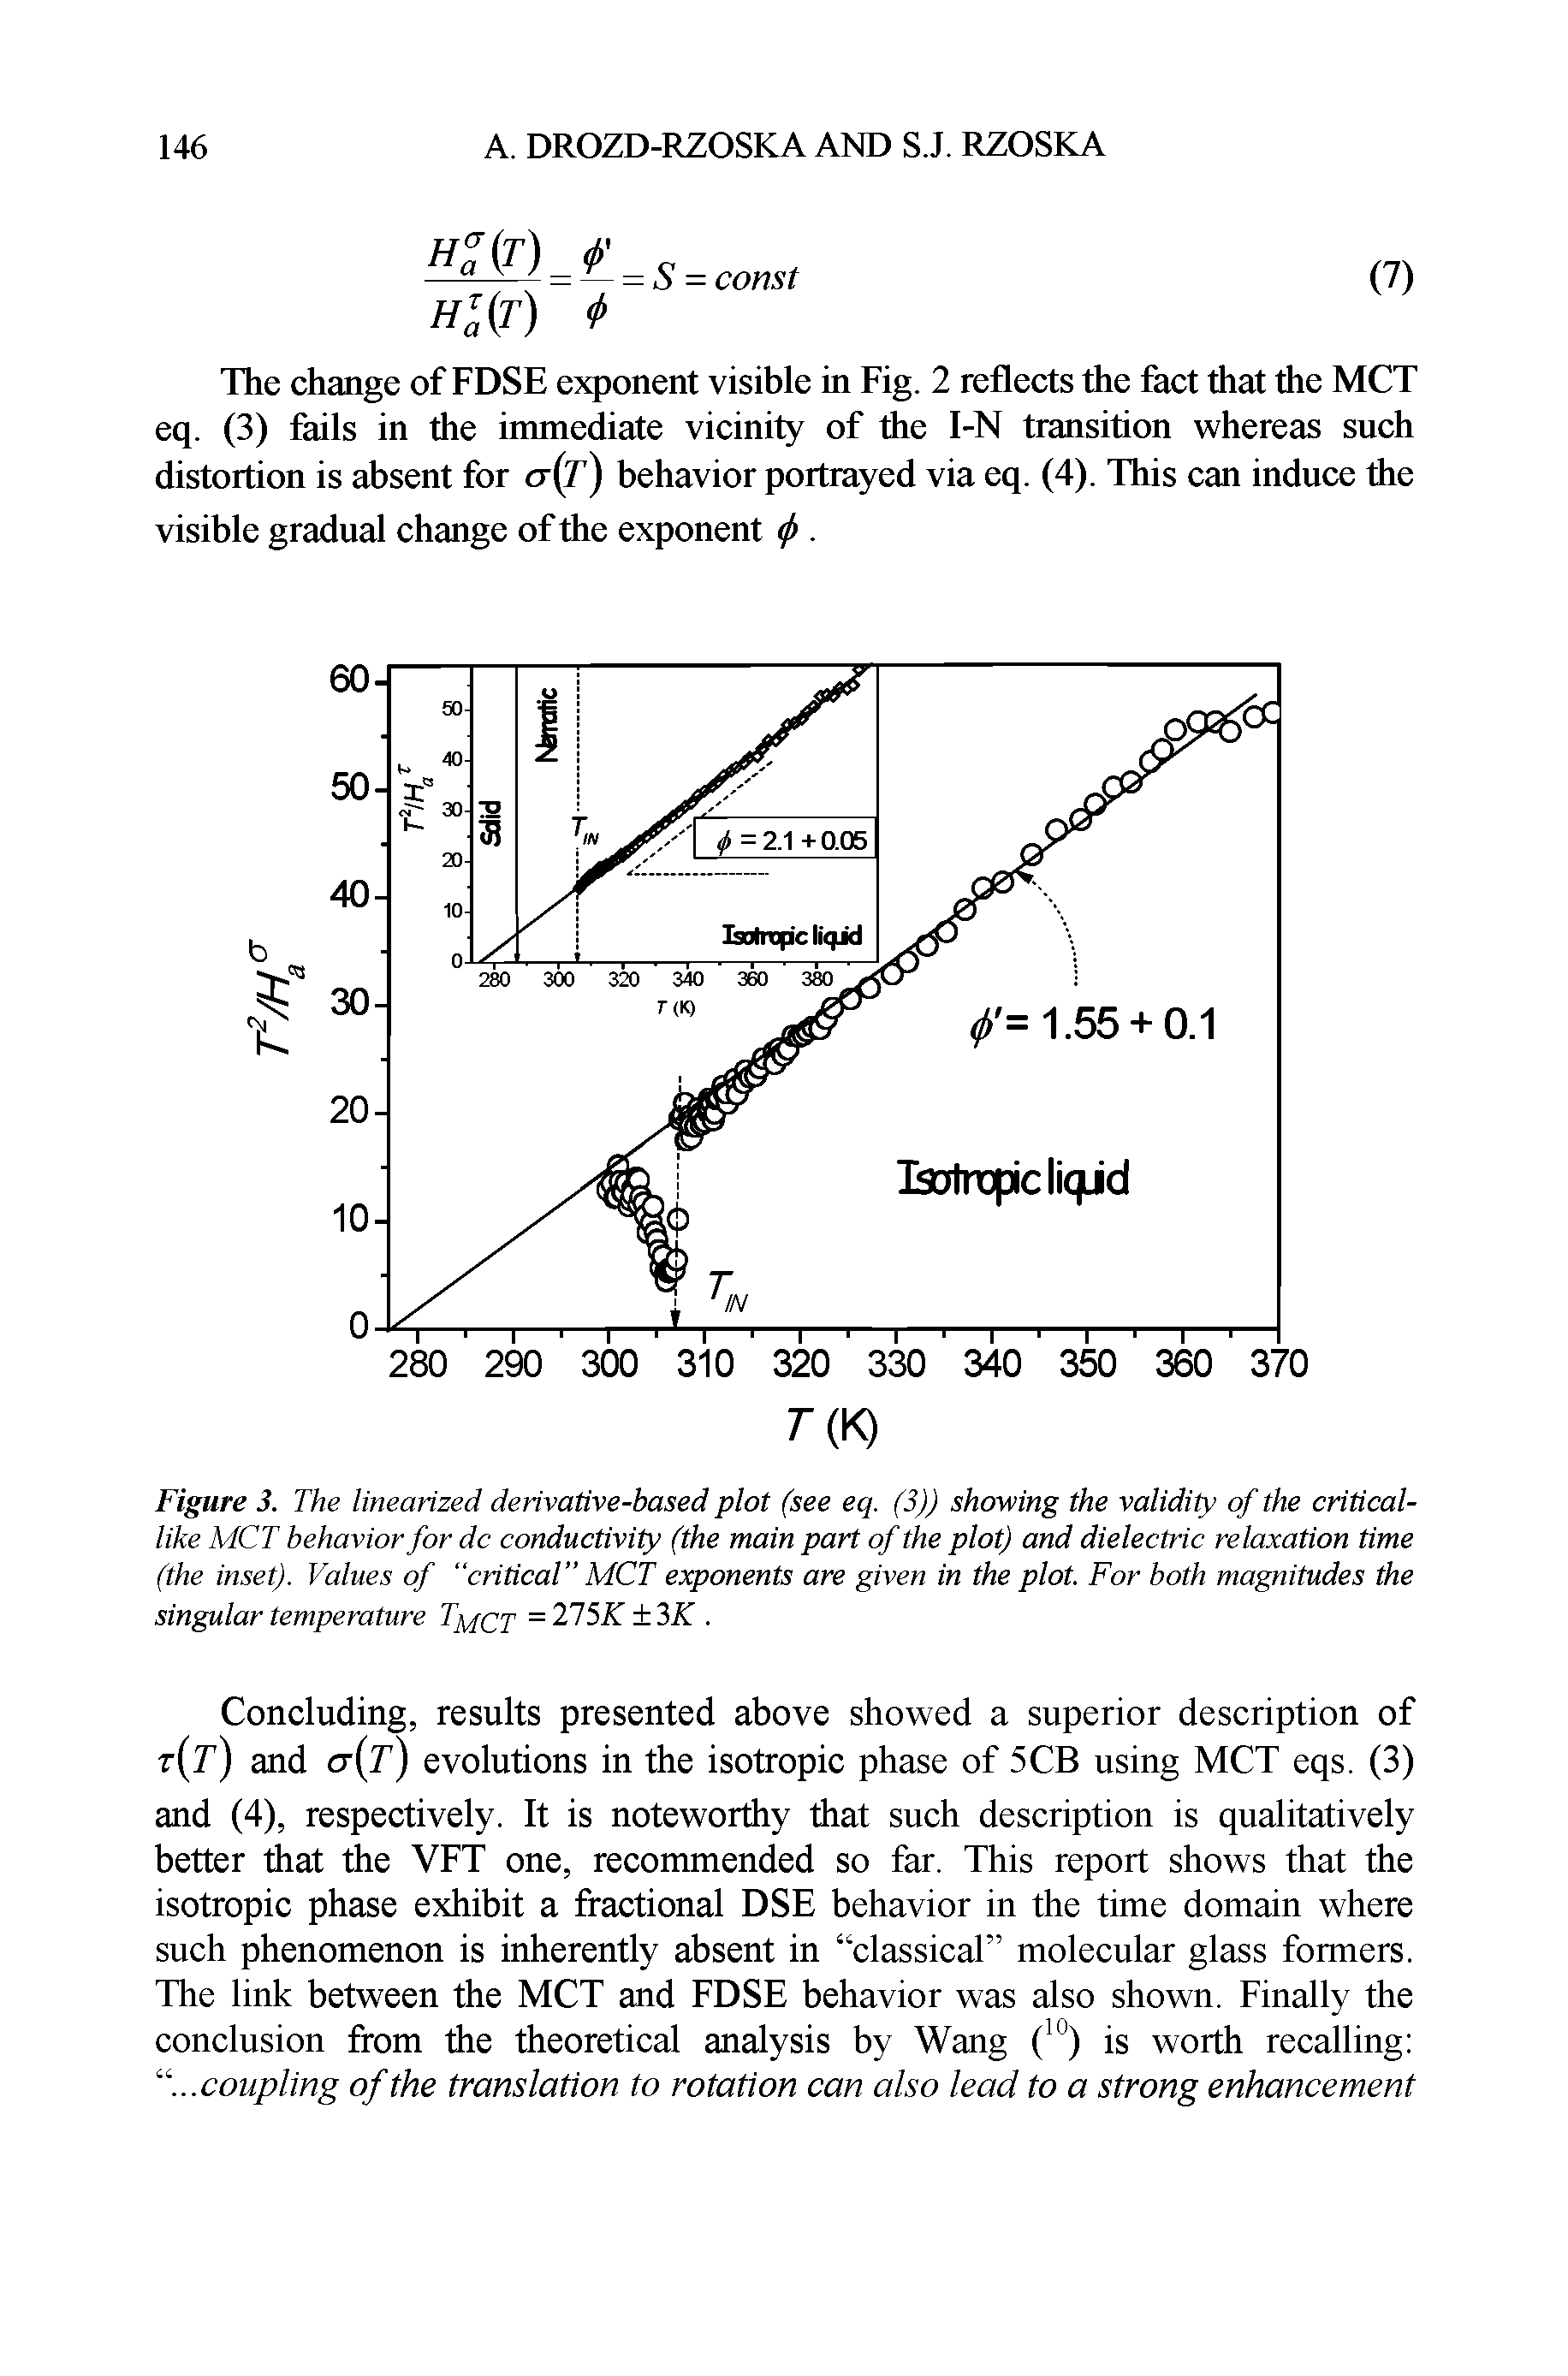 Figure 3. The linearized derivative-based plot (see eq. (3)) showing the validity of the critical-like MCT behavior for dc conductivity (the main part of the plot) and dielectric relaxation time (the inset). Values of critical MCT exponents are given in the plot. For both magnitudes the singular temperature TyqQp =215K + 3K. ...